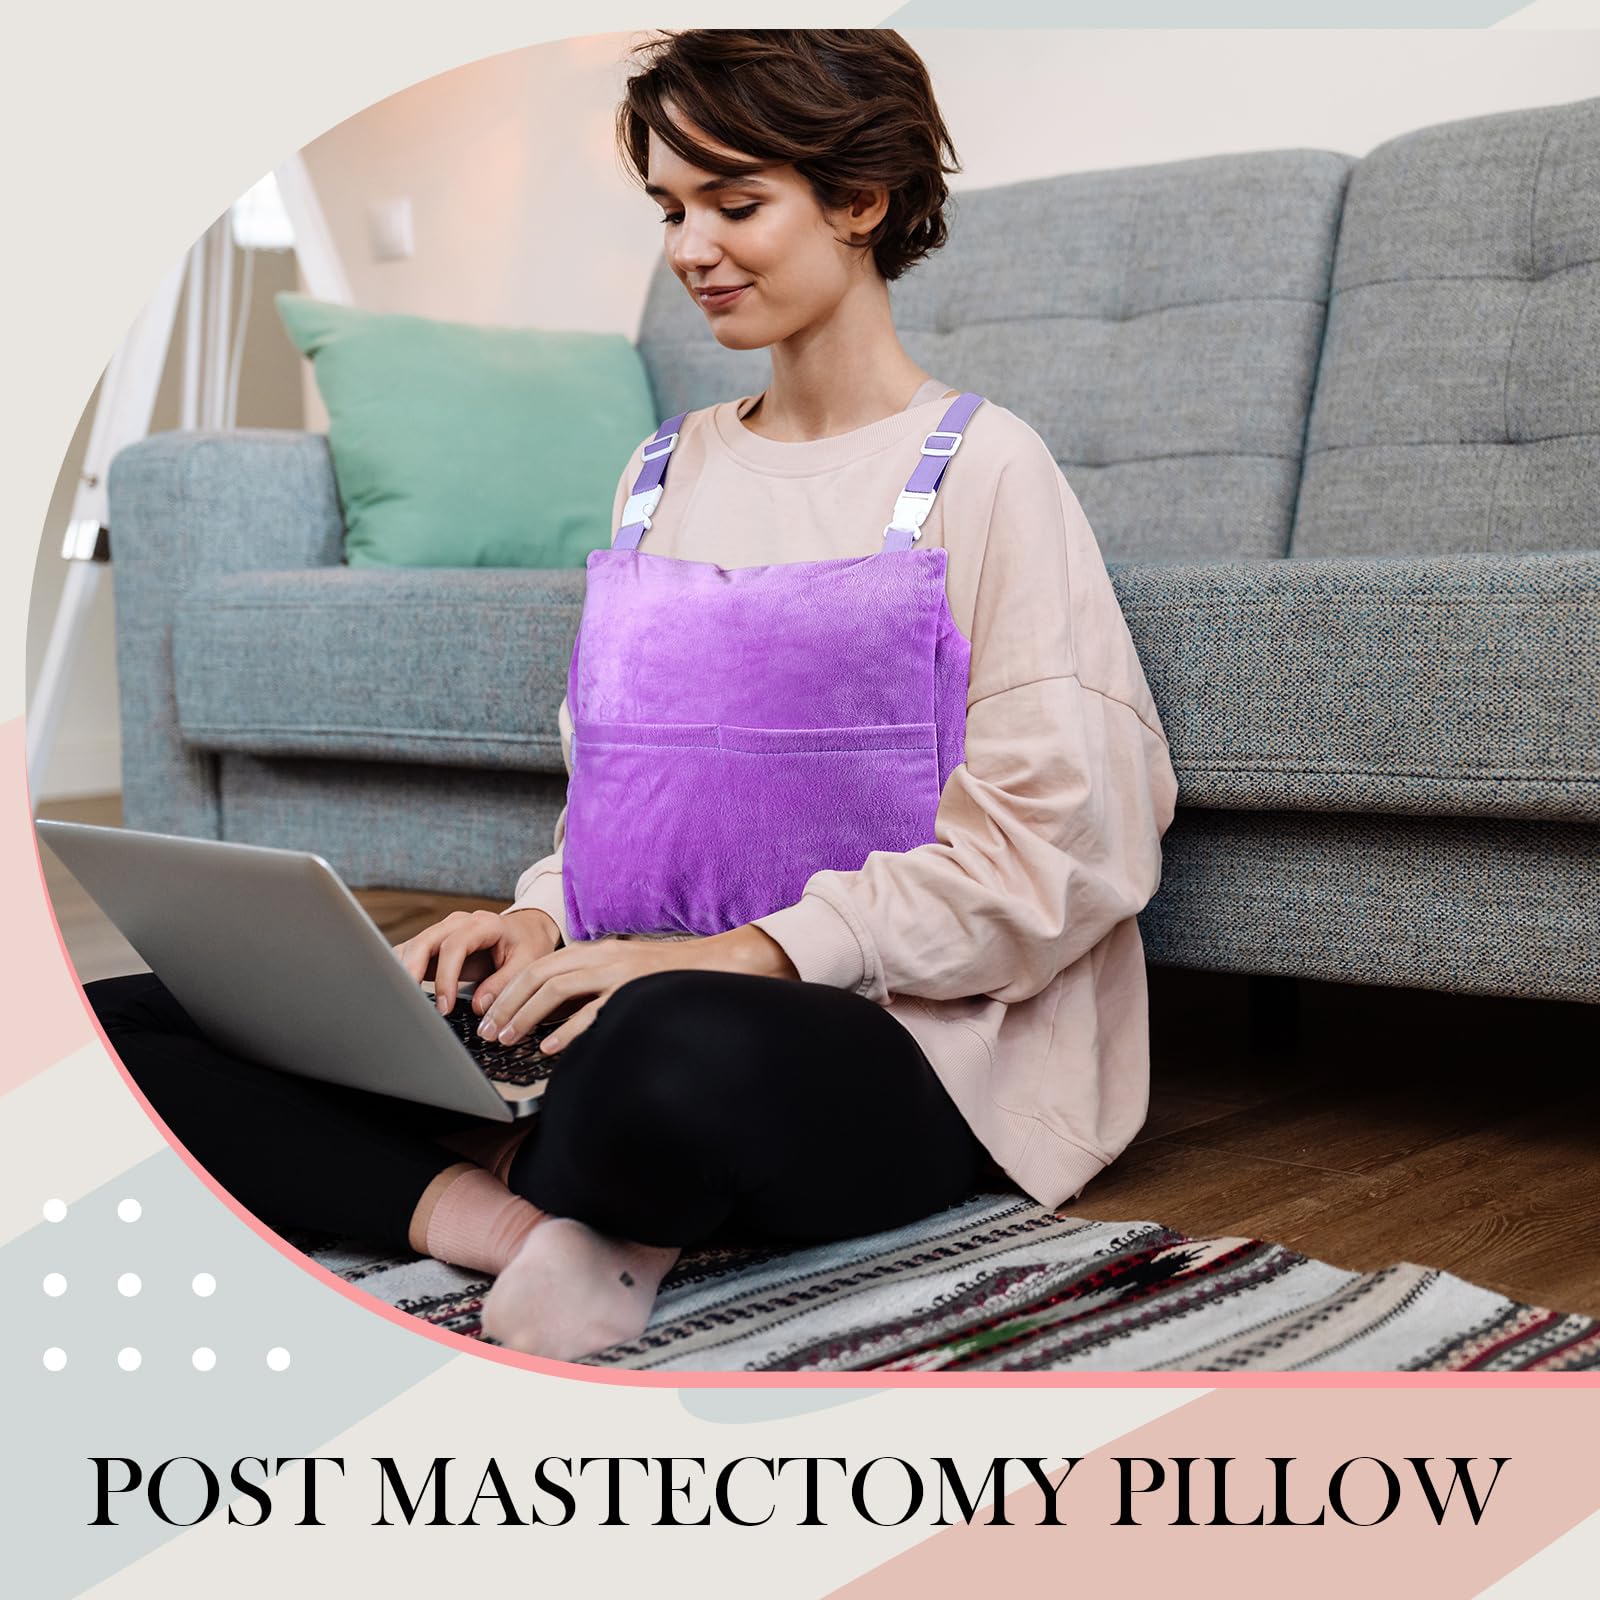 Mastectomy Pillow Post Surgery Pillow, Breast Pillow for After Breast Cancer Mastectomy Necessities, Mastectomy Pillow for Mastectomy Surgery Recovery and Breast Reduction, Gifts for Women (Lavender)